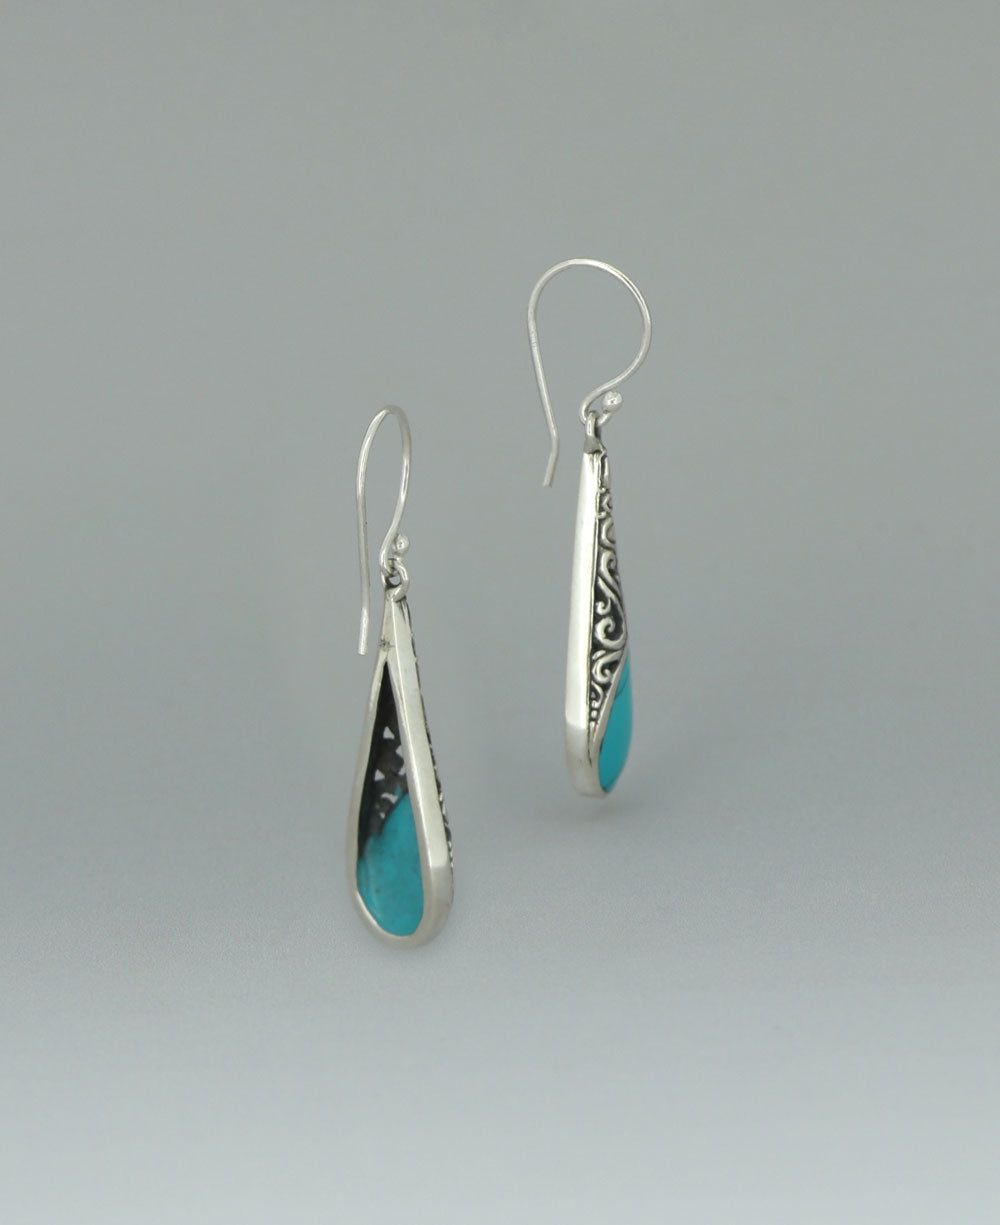 Sterling silver Reconstituted Turquoise earrings, emphasizing the elongated teardrop shape and the striking contrast between the turquoise and filigree design